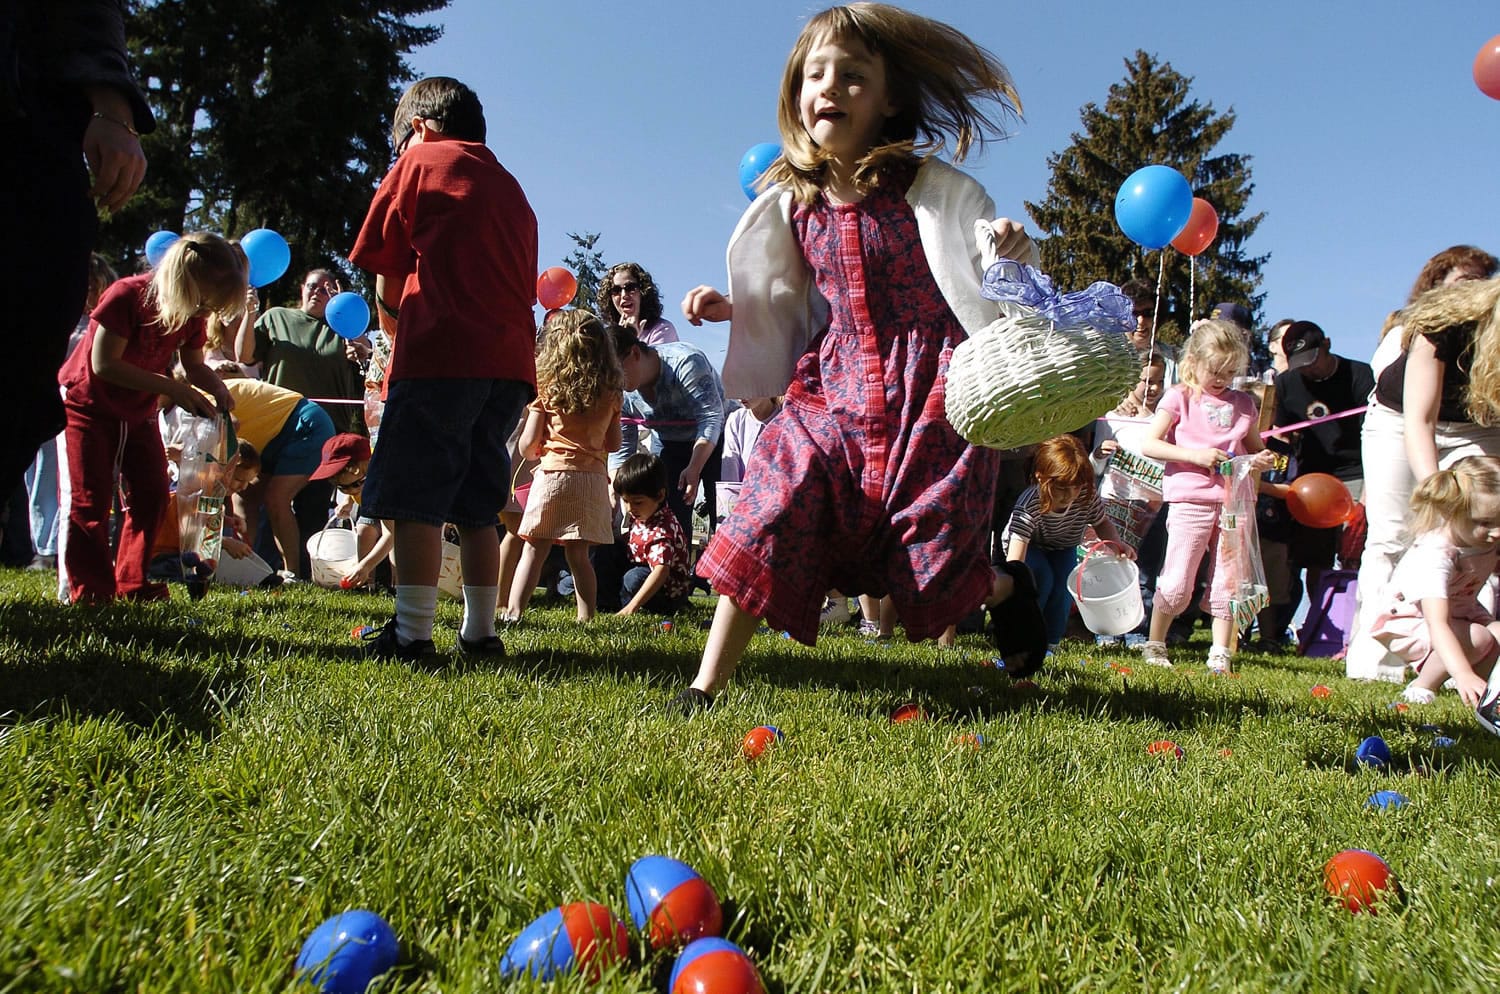 Hundreds of children will race to fill their baskets with Easter eggs Saturday morning at Esther Short Park.